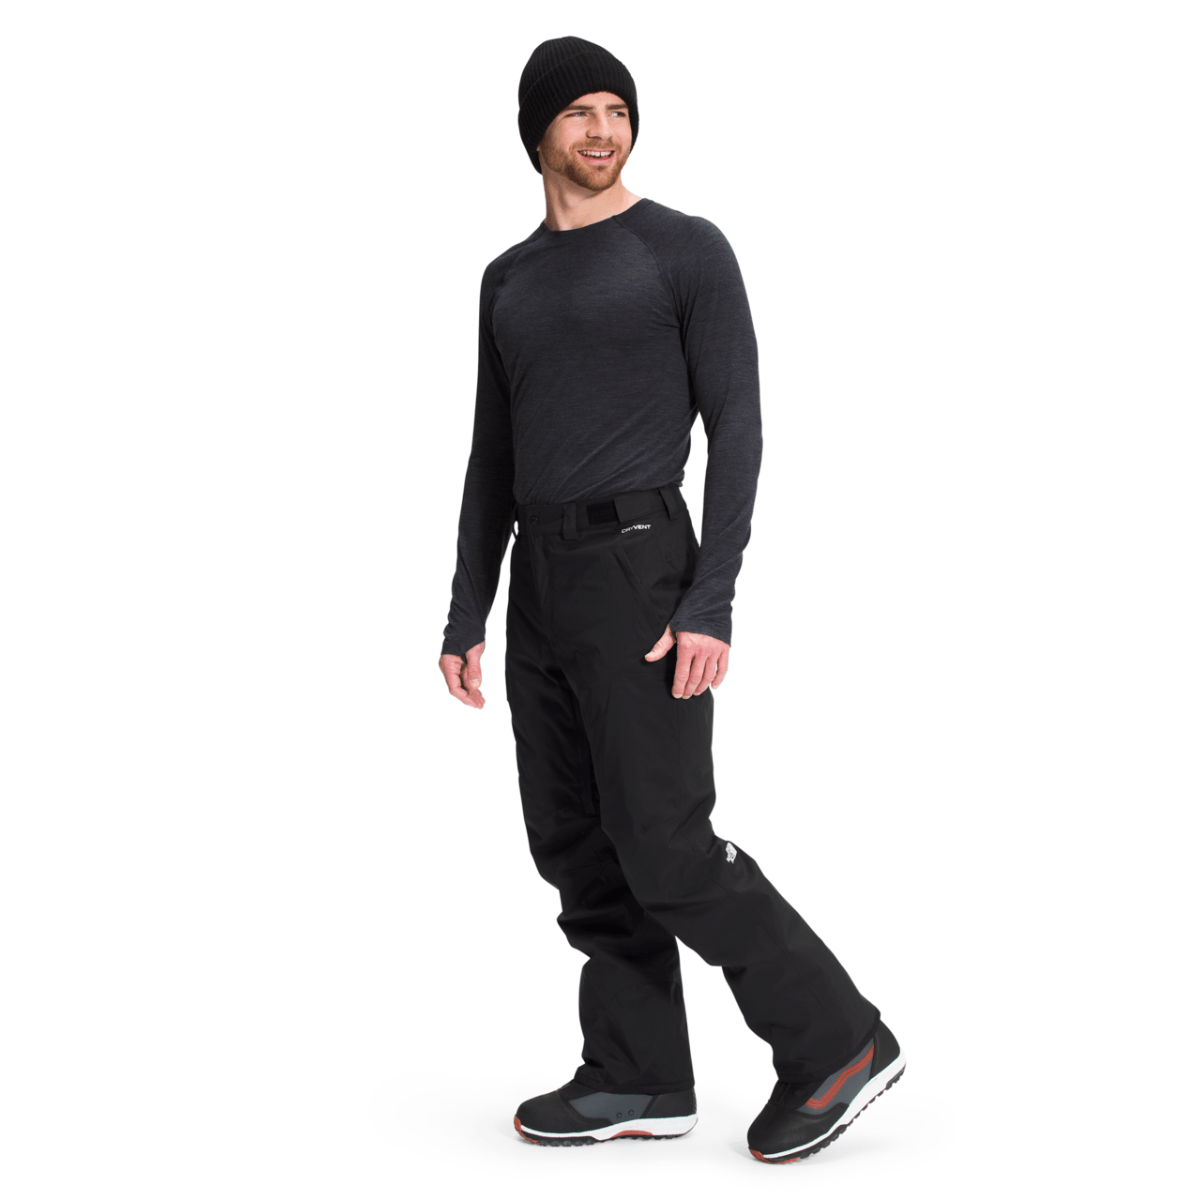 The North Face Freedom Insulated Pant Mens